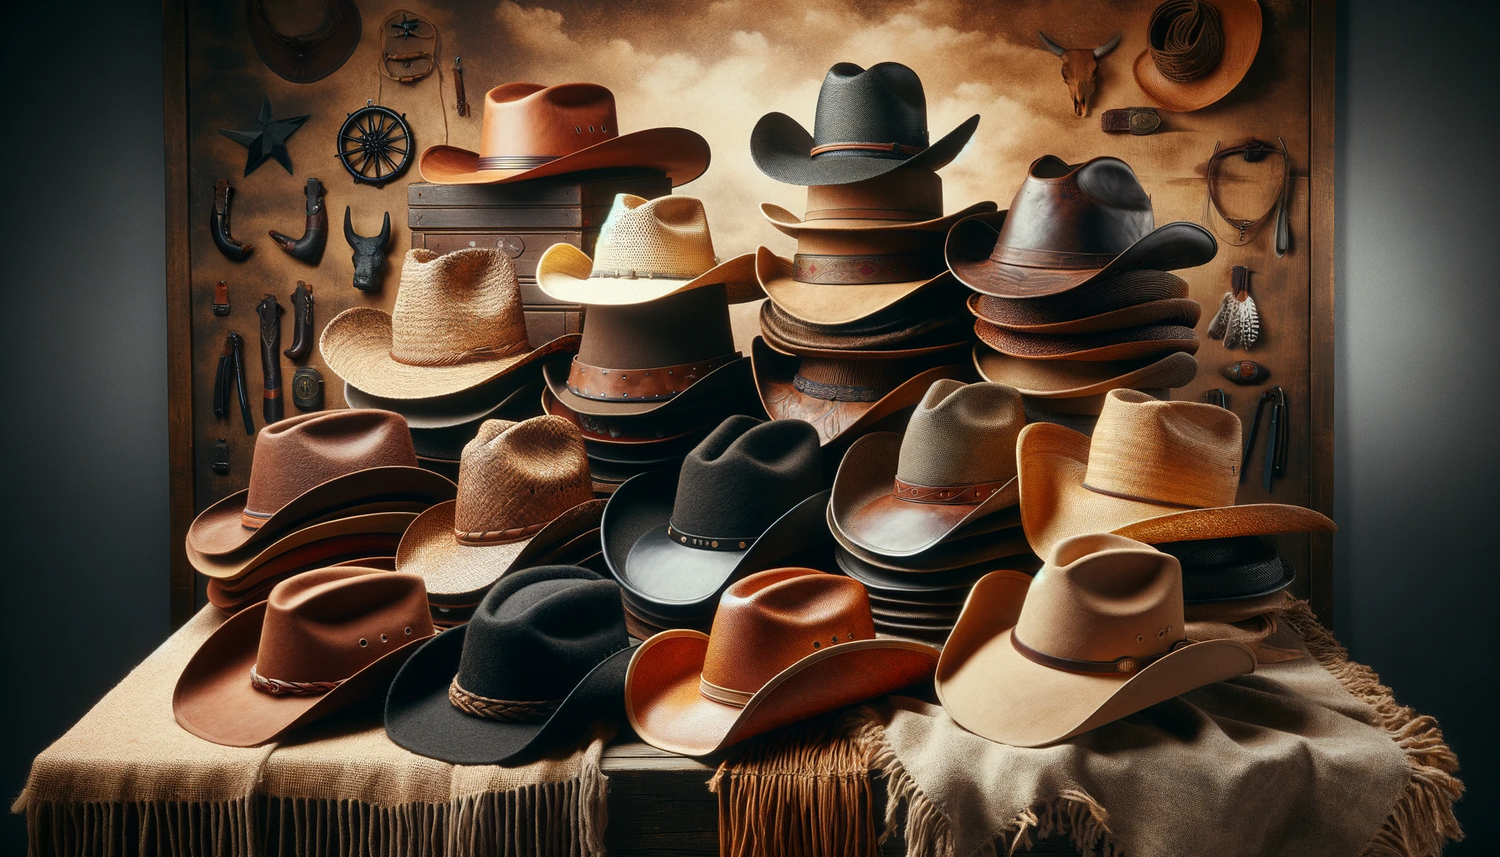 What Are Cowboy Hats Made Of